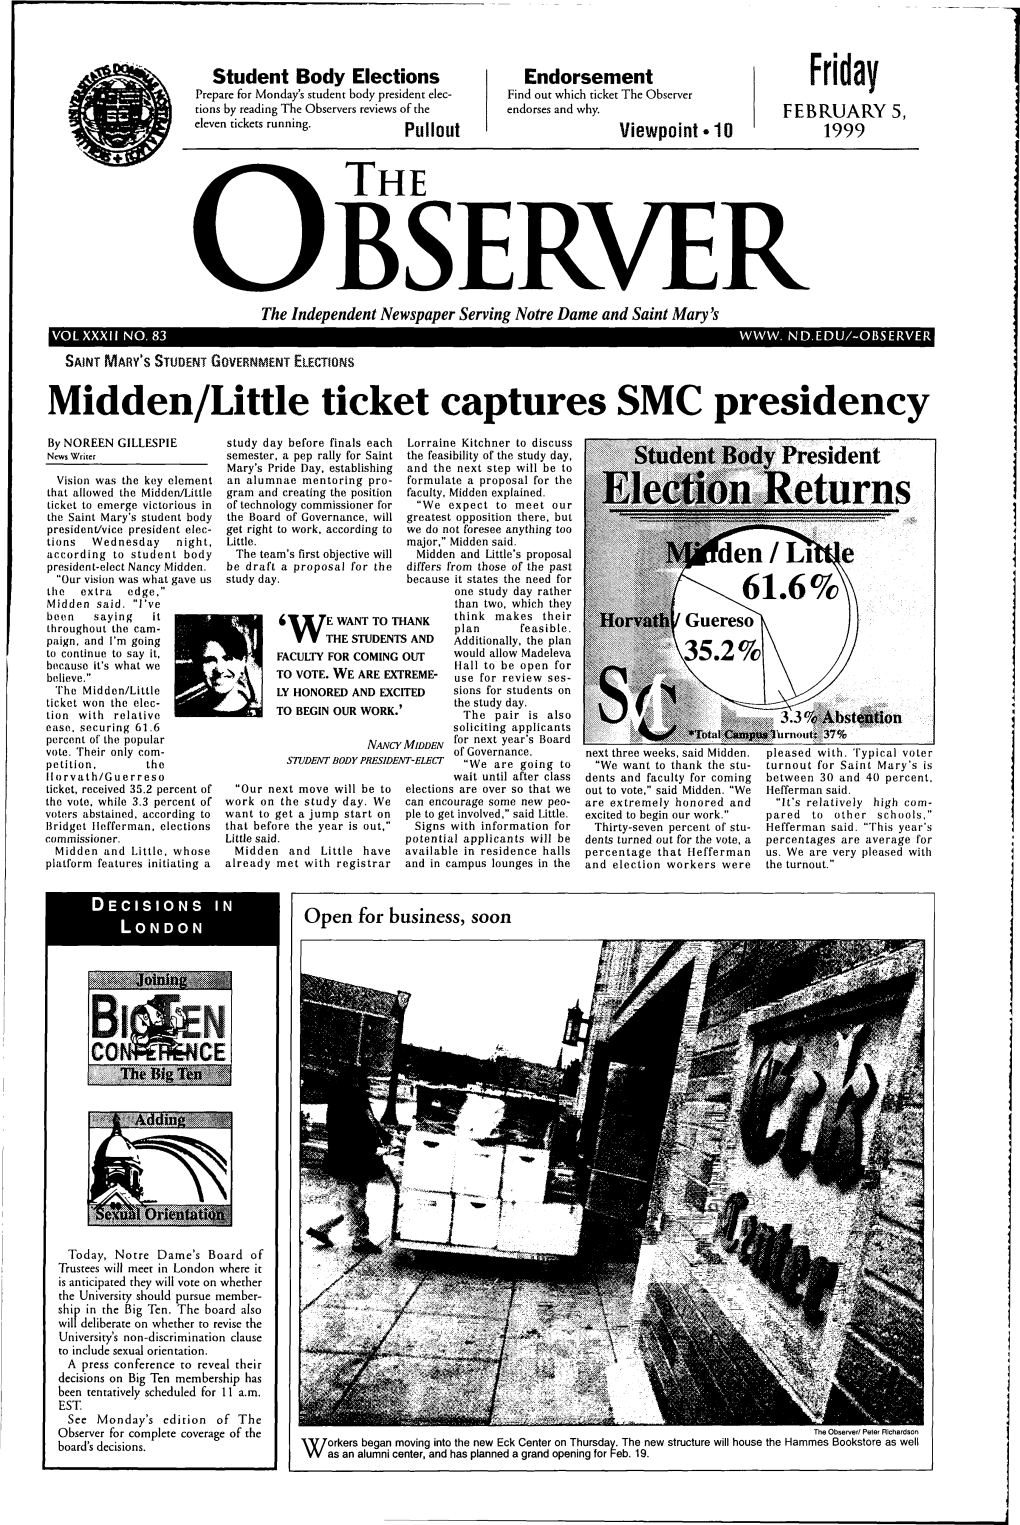 Friday Prepare for Monday's Student Body President Elec­ Find out Which Ticket the Observer Tions by Reading the Observers Reviews of the Endorses and Why